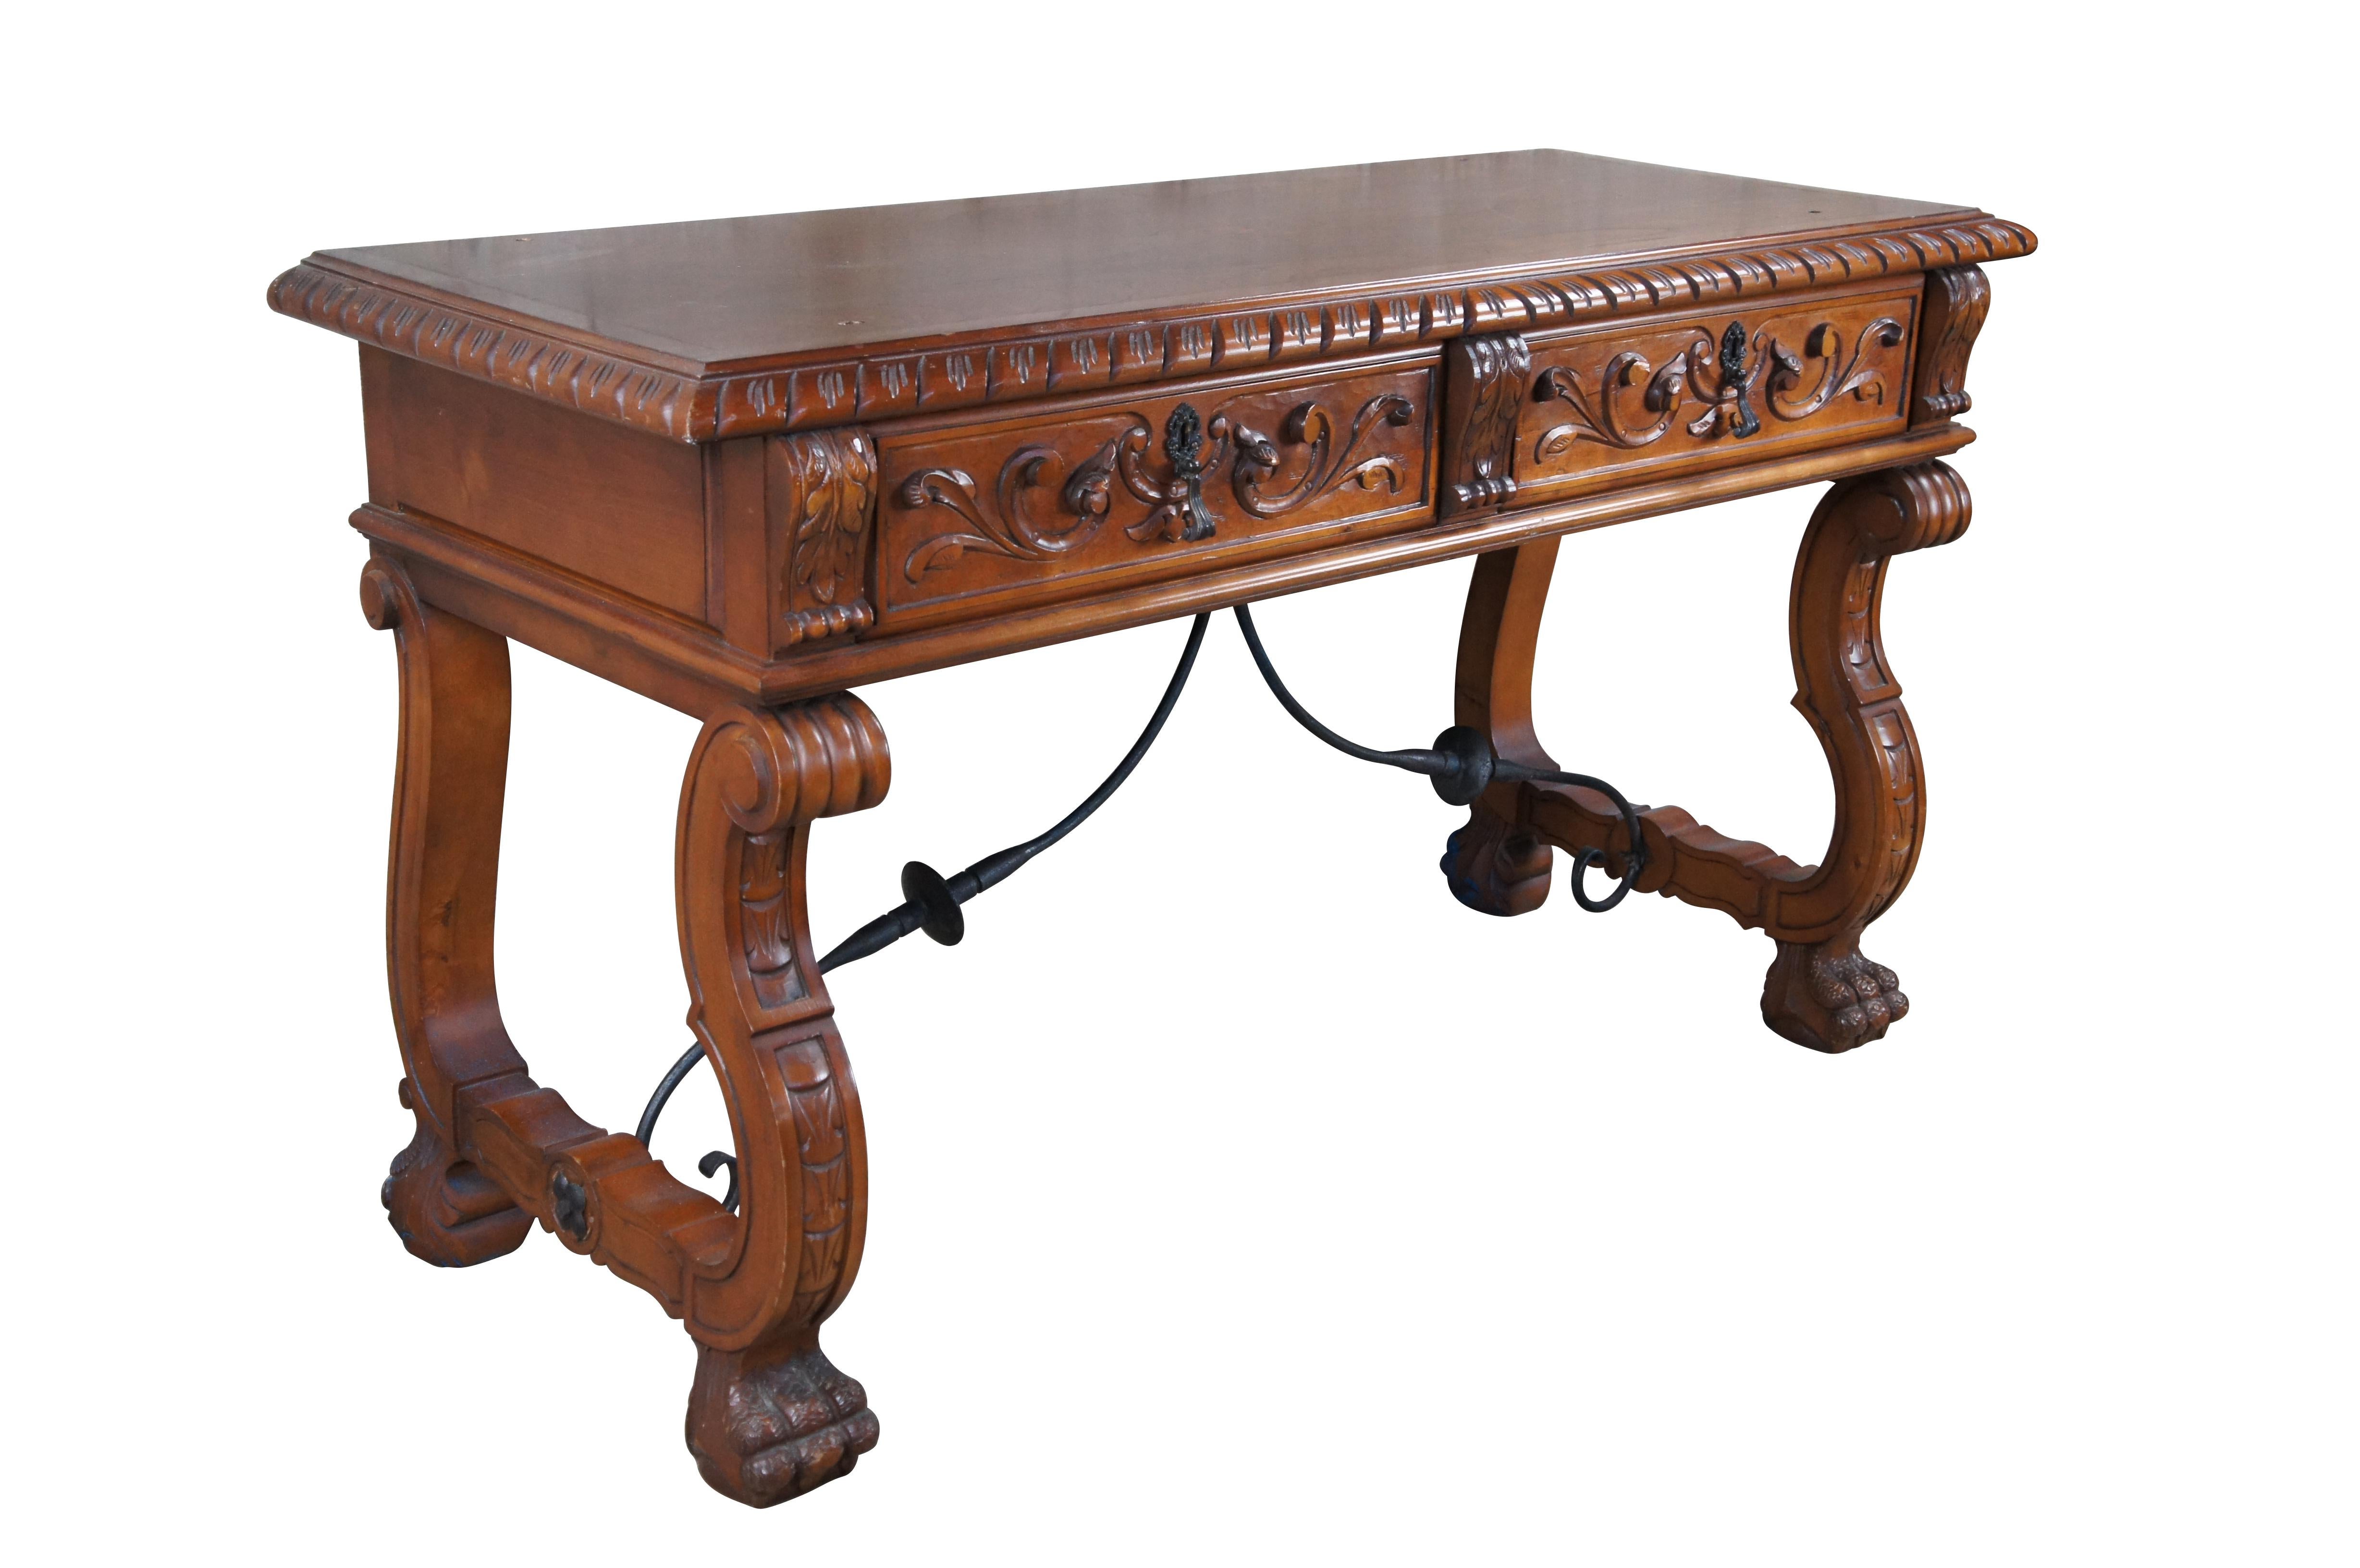 Vintage Jesus Ballester Marco of Valencia, Spain sideboard, library console or writing desk.  Made of mahogany featuring rectangular form with scrolled iron and acanthus accents over harp shaped legs and hairy lion paw / claw feet. 

Dimensions:
49